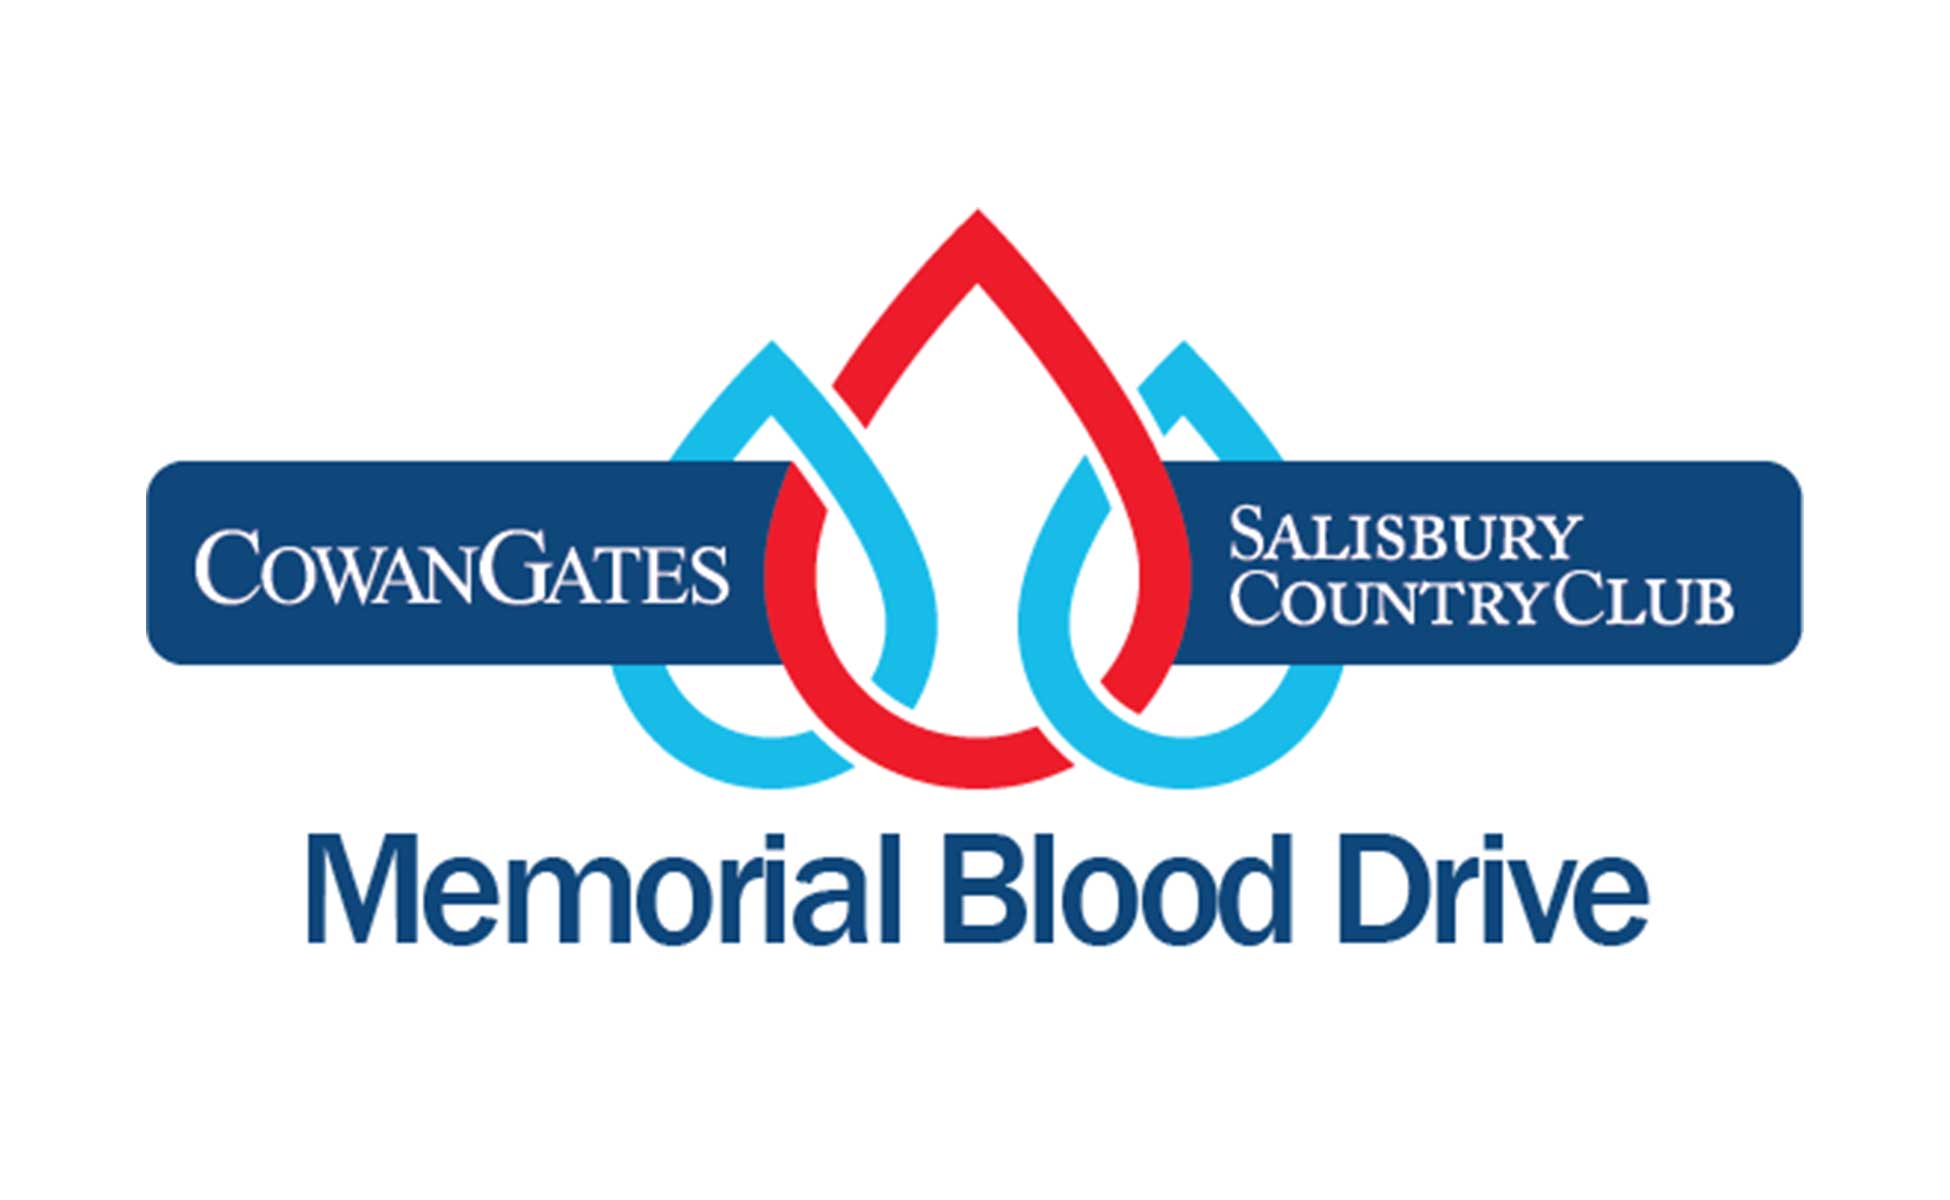 Join the attorneys and staff of CowanGates on Friday, July 20, 2018 for the CowanGates and Salisbury Country Club Memorial Blood Drive.